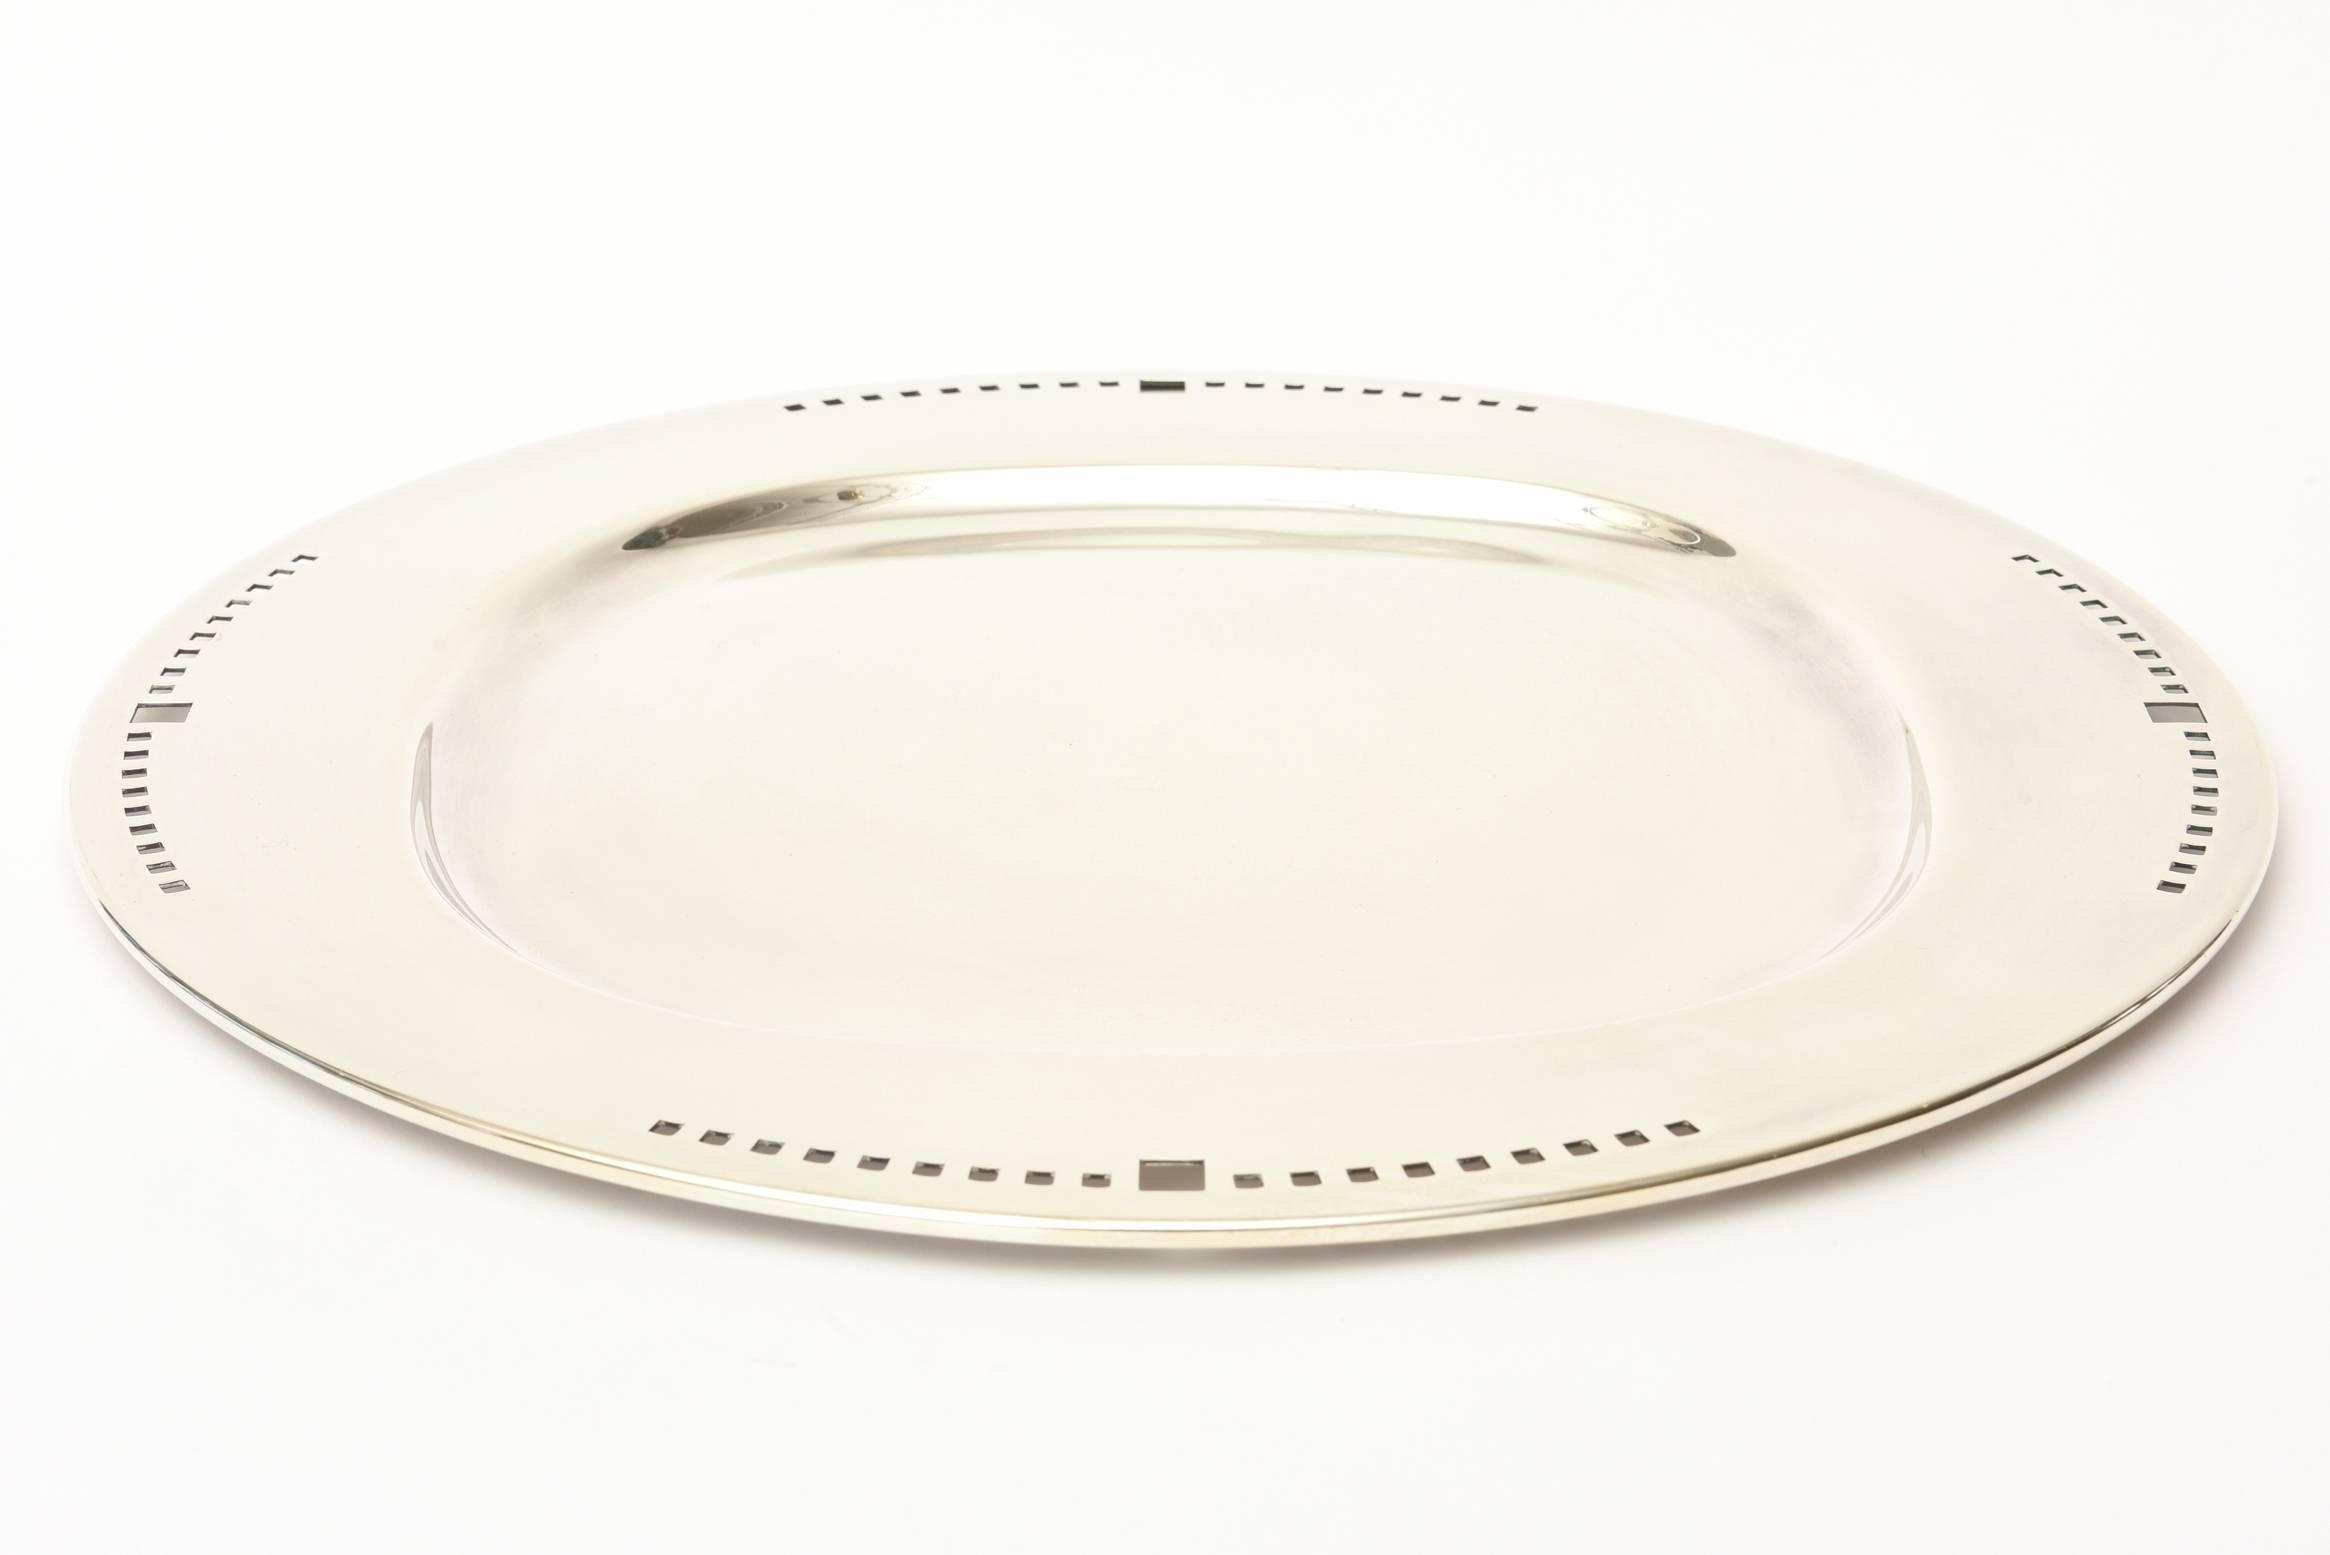 This architectural tray signed and designed by the architect Richard Meier for Swid Powell
is called the skyscraper tray. It is hallmarked on the back. Made of silver-plate in
Italy.
These are a bit harder to come by these days.
Timeless and